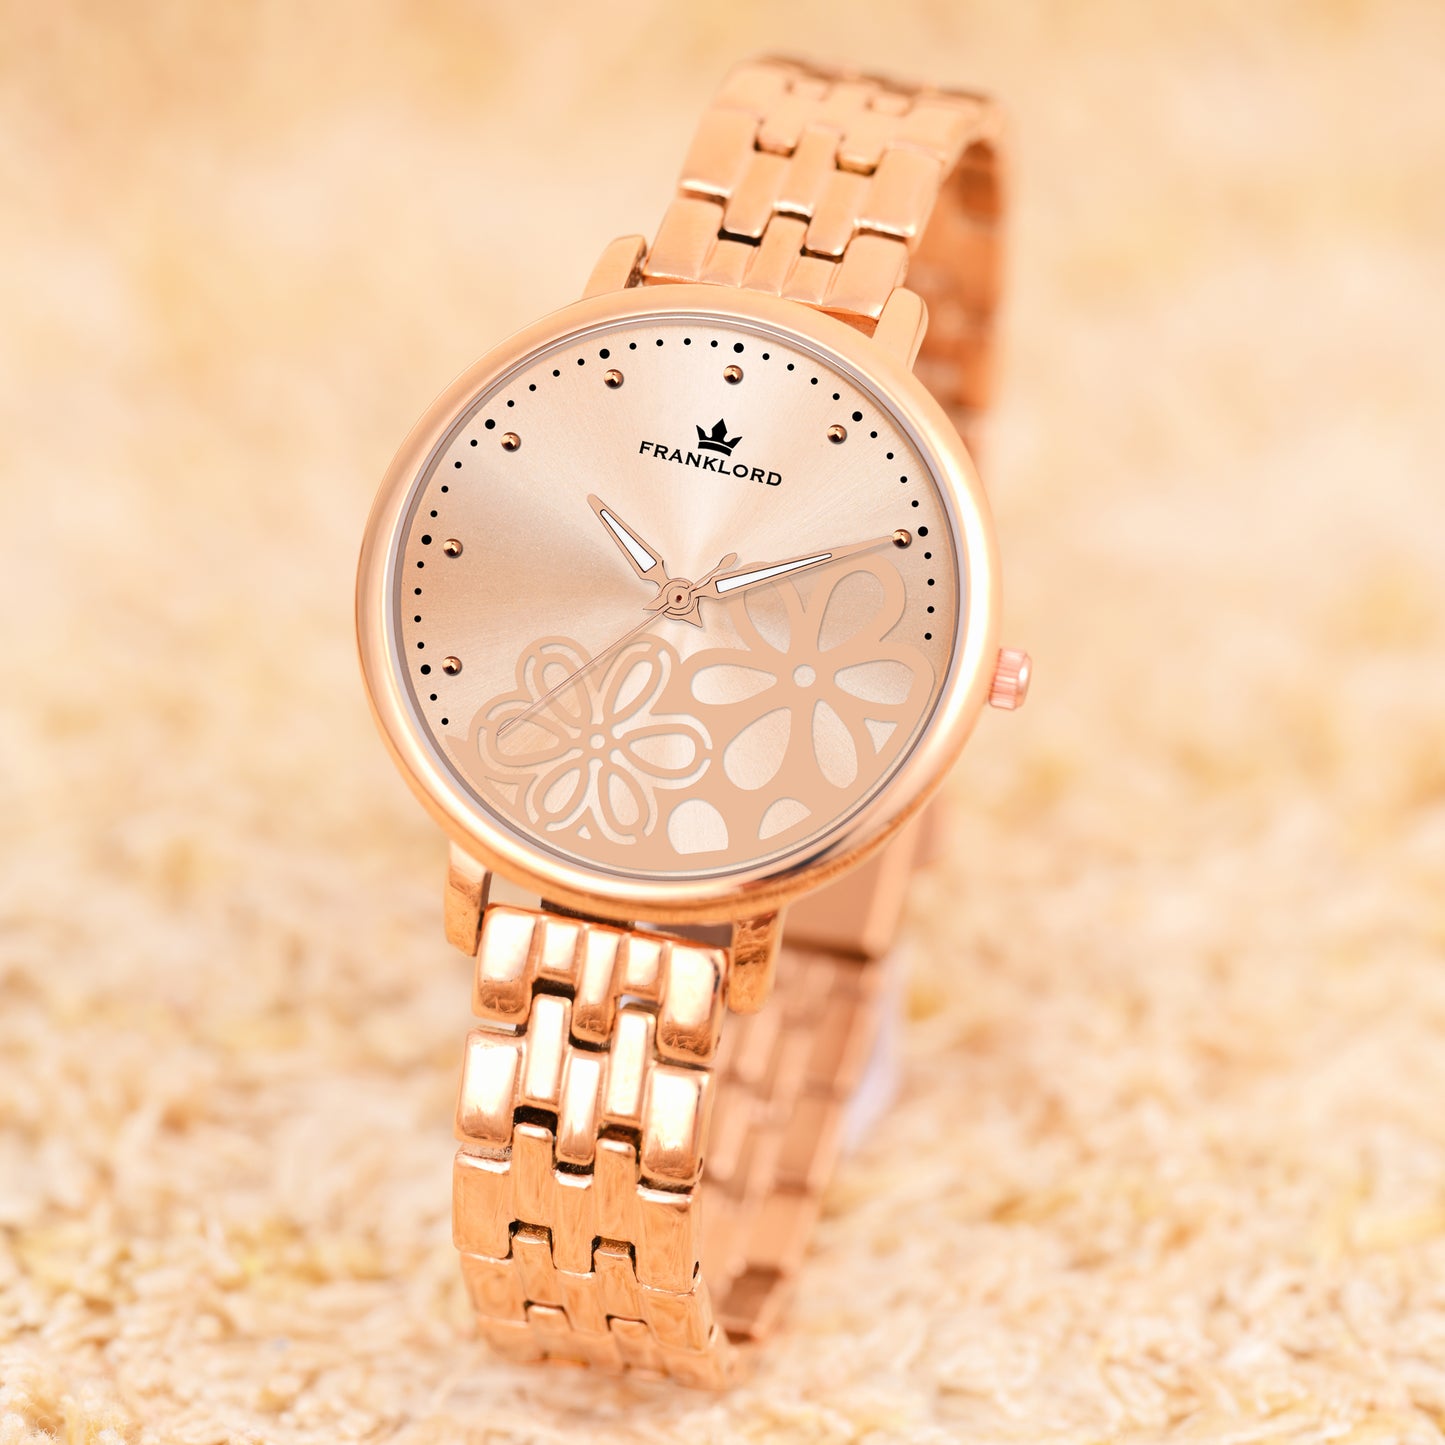 THE FLORA -Rose Gold -Timeless Elegance Watch For Women F-133 RRL